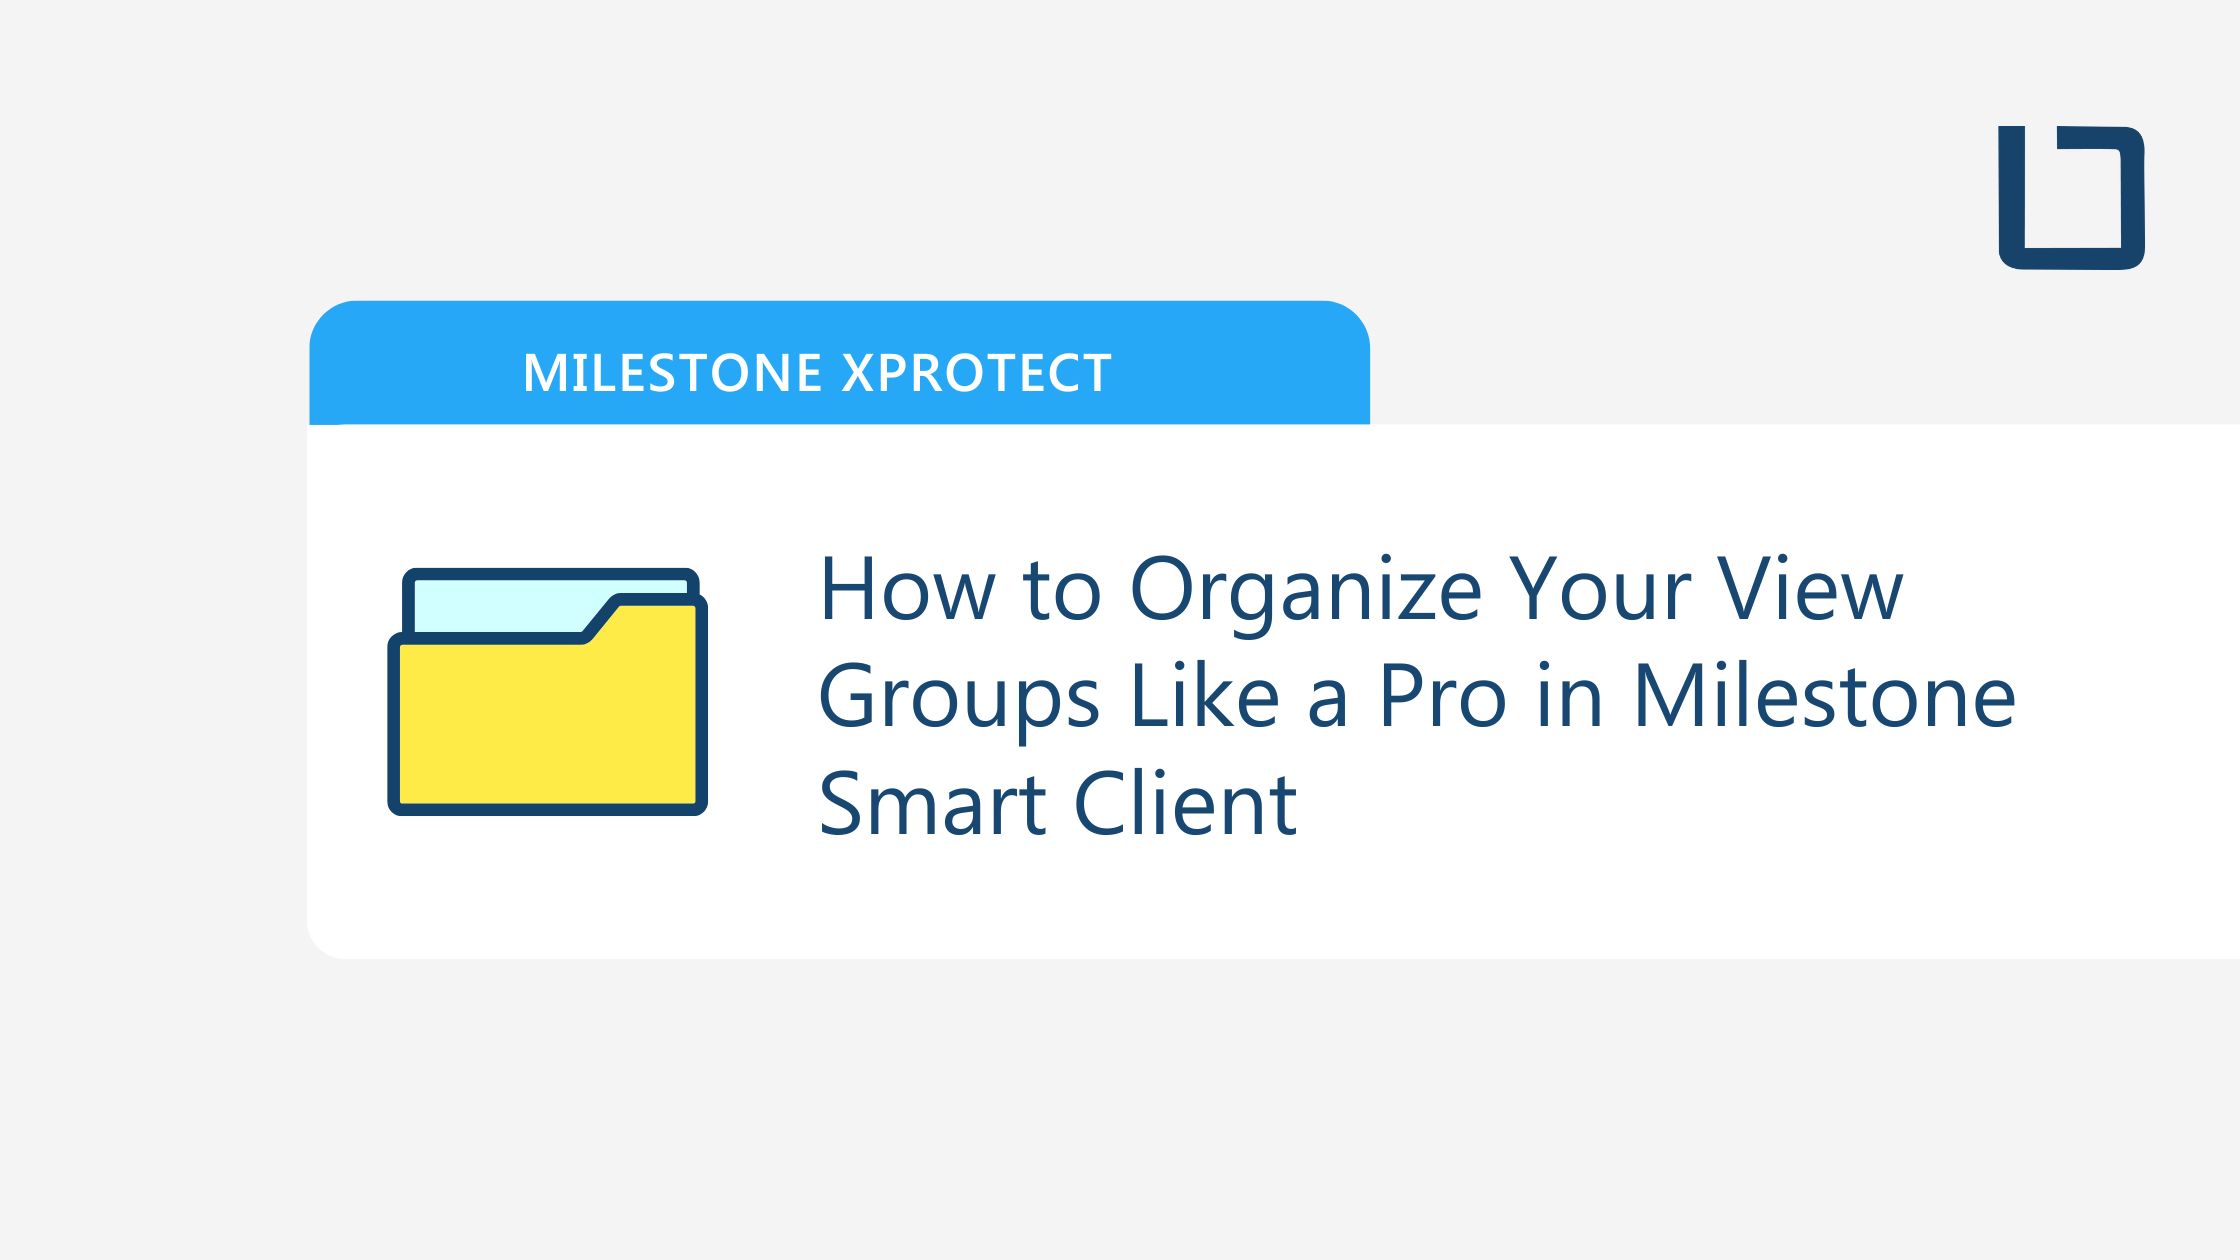 How to Organize Your View Groups Like a Pro in Milestone Smart Client